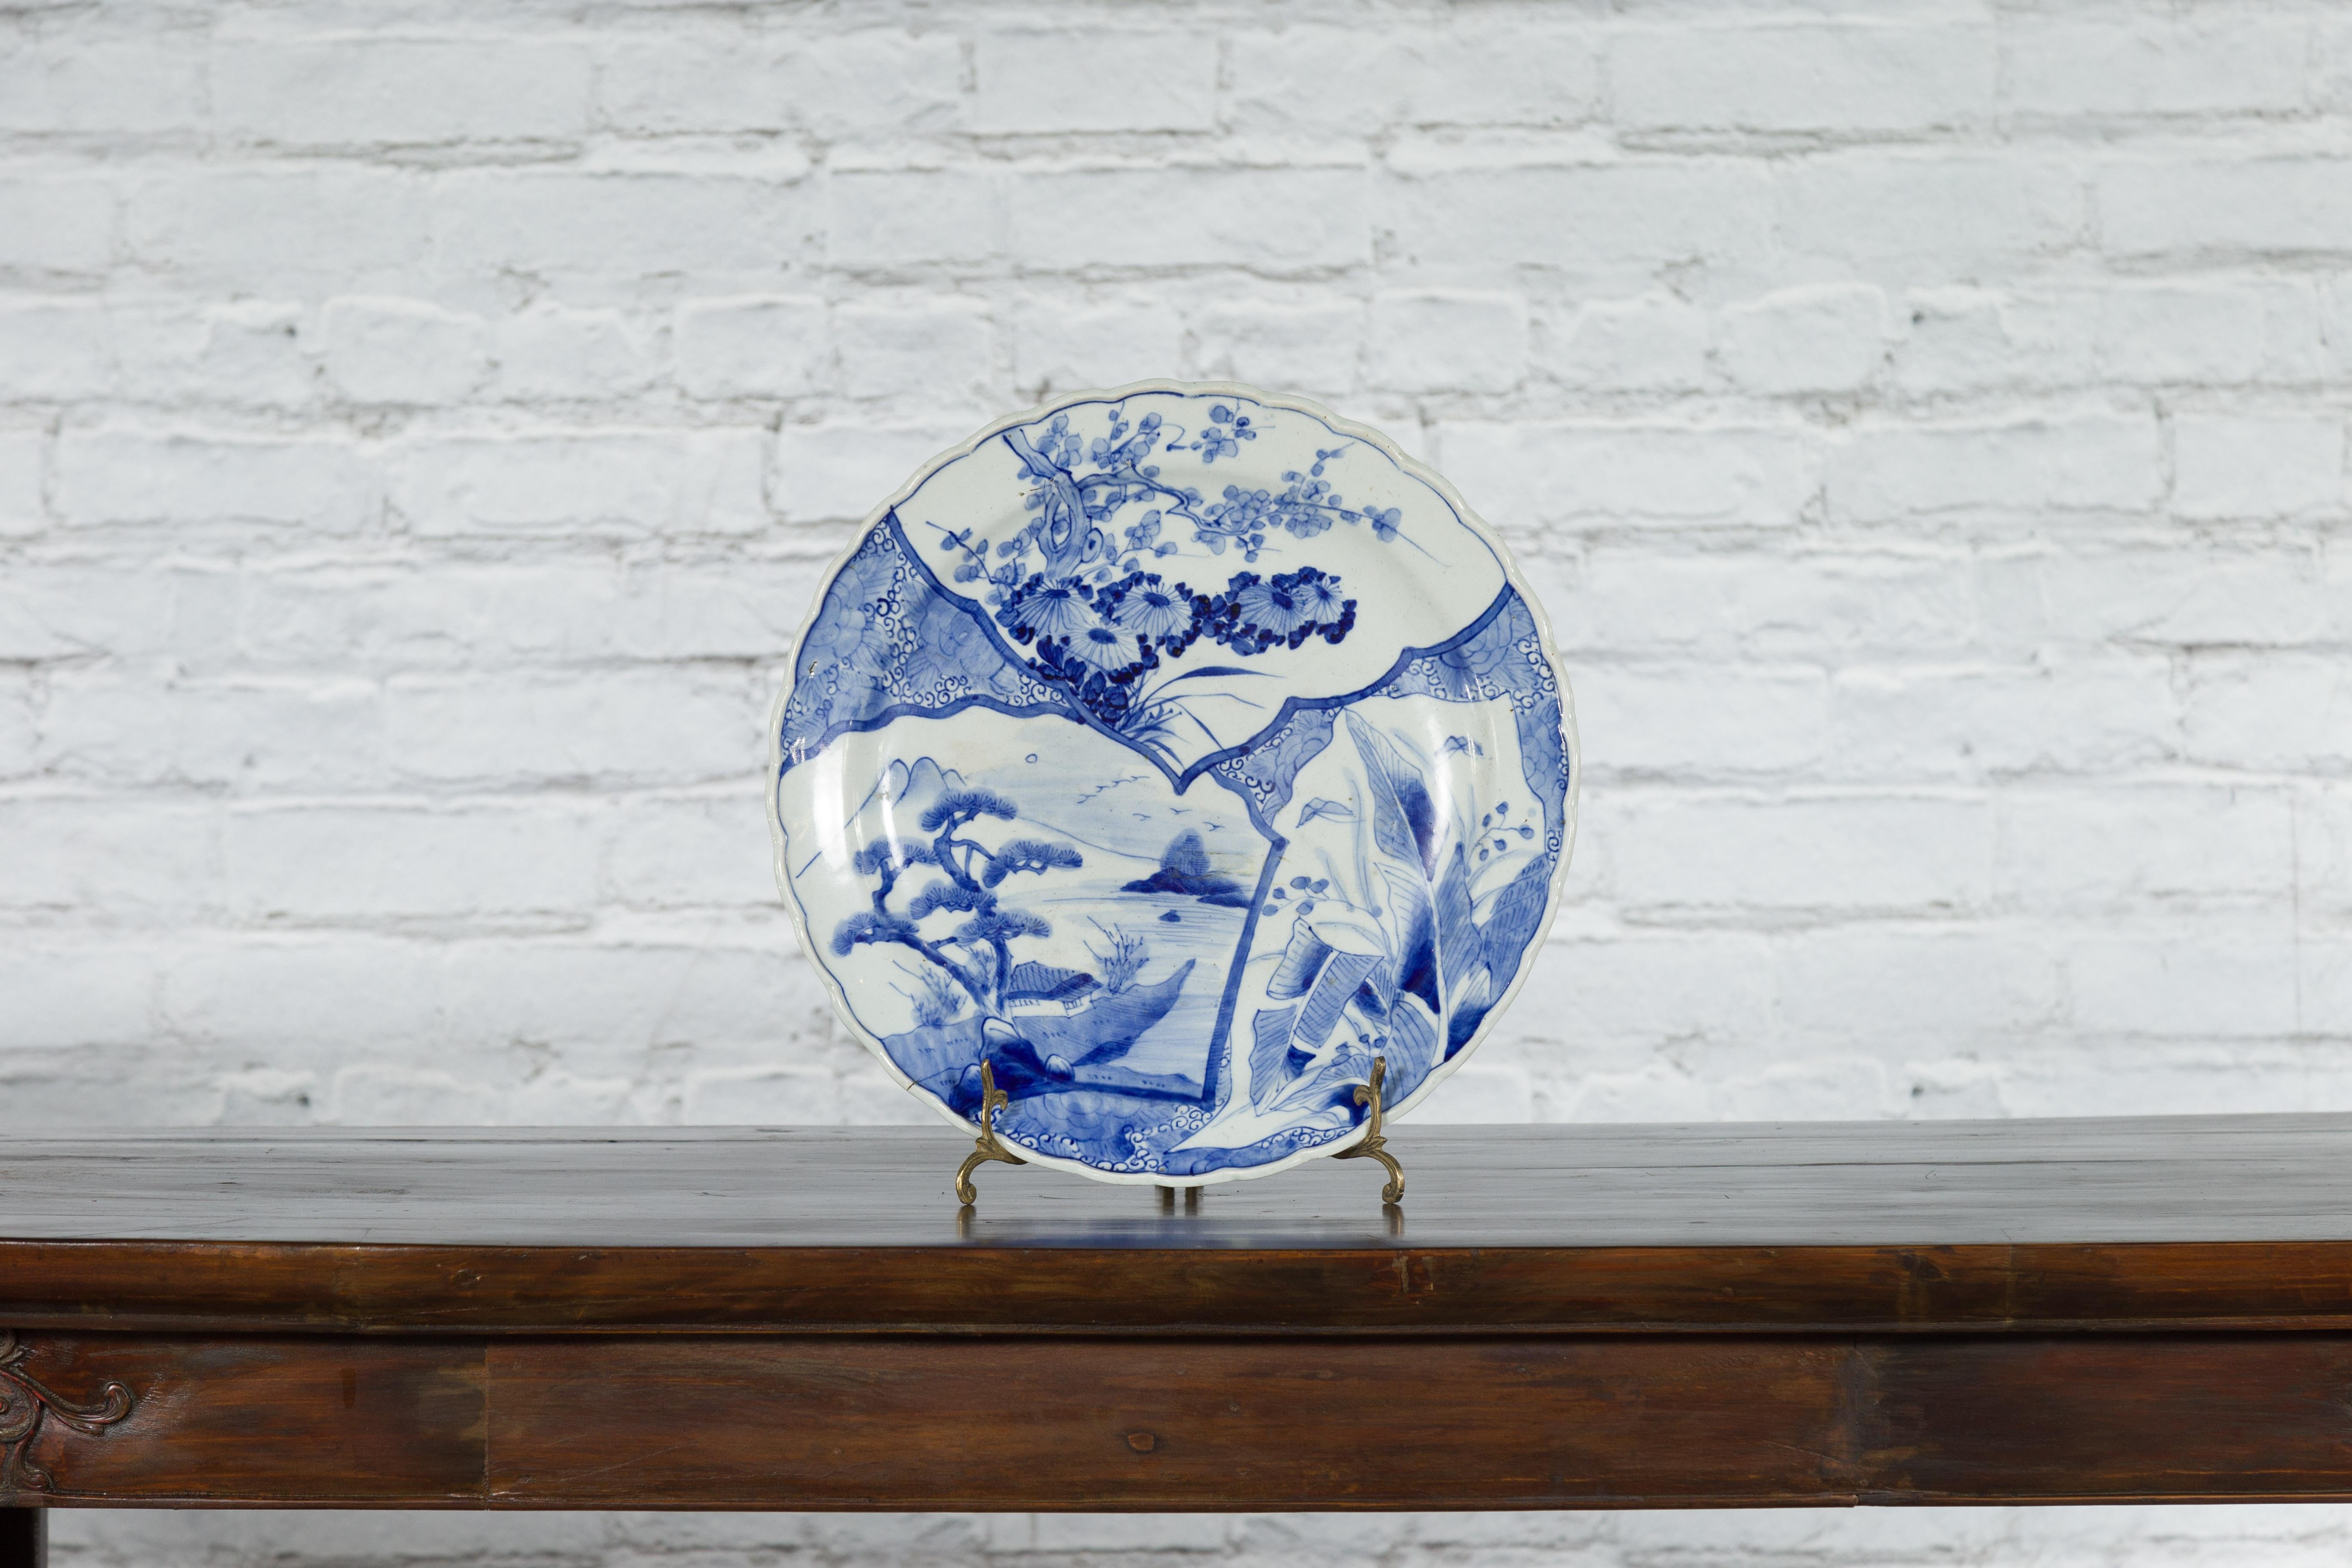 A Japanese Imari porcelain plate from the 19th century, with hand-painted blue and white foliage, tree and architecture décor. Created in Japan during the 19th century, this Imari porcelain plate features a delicate blue and white décor divided into